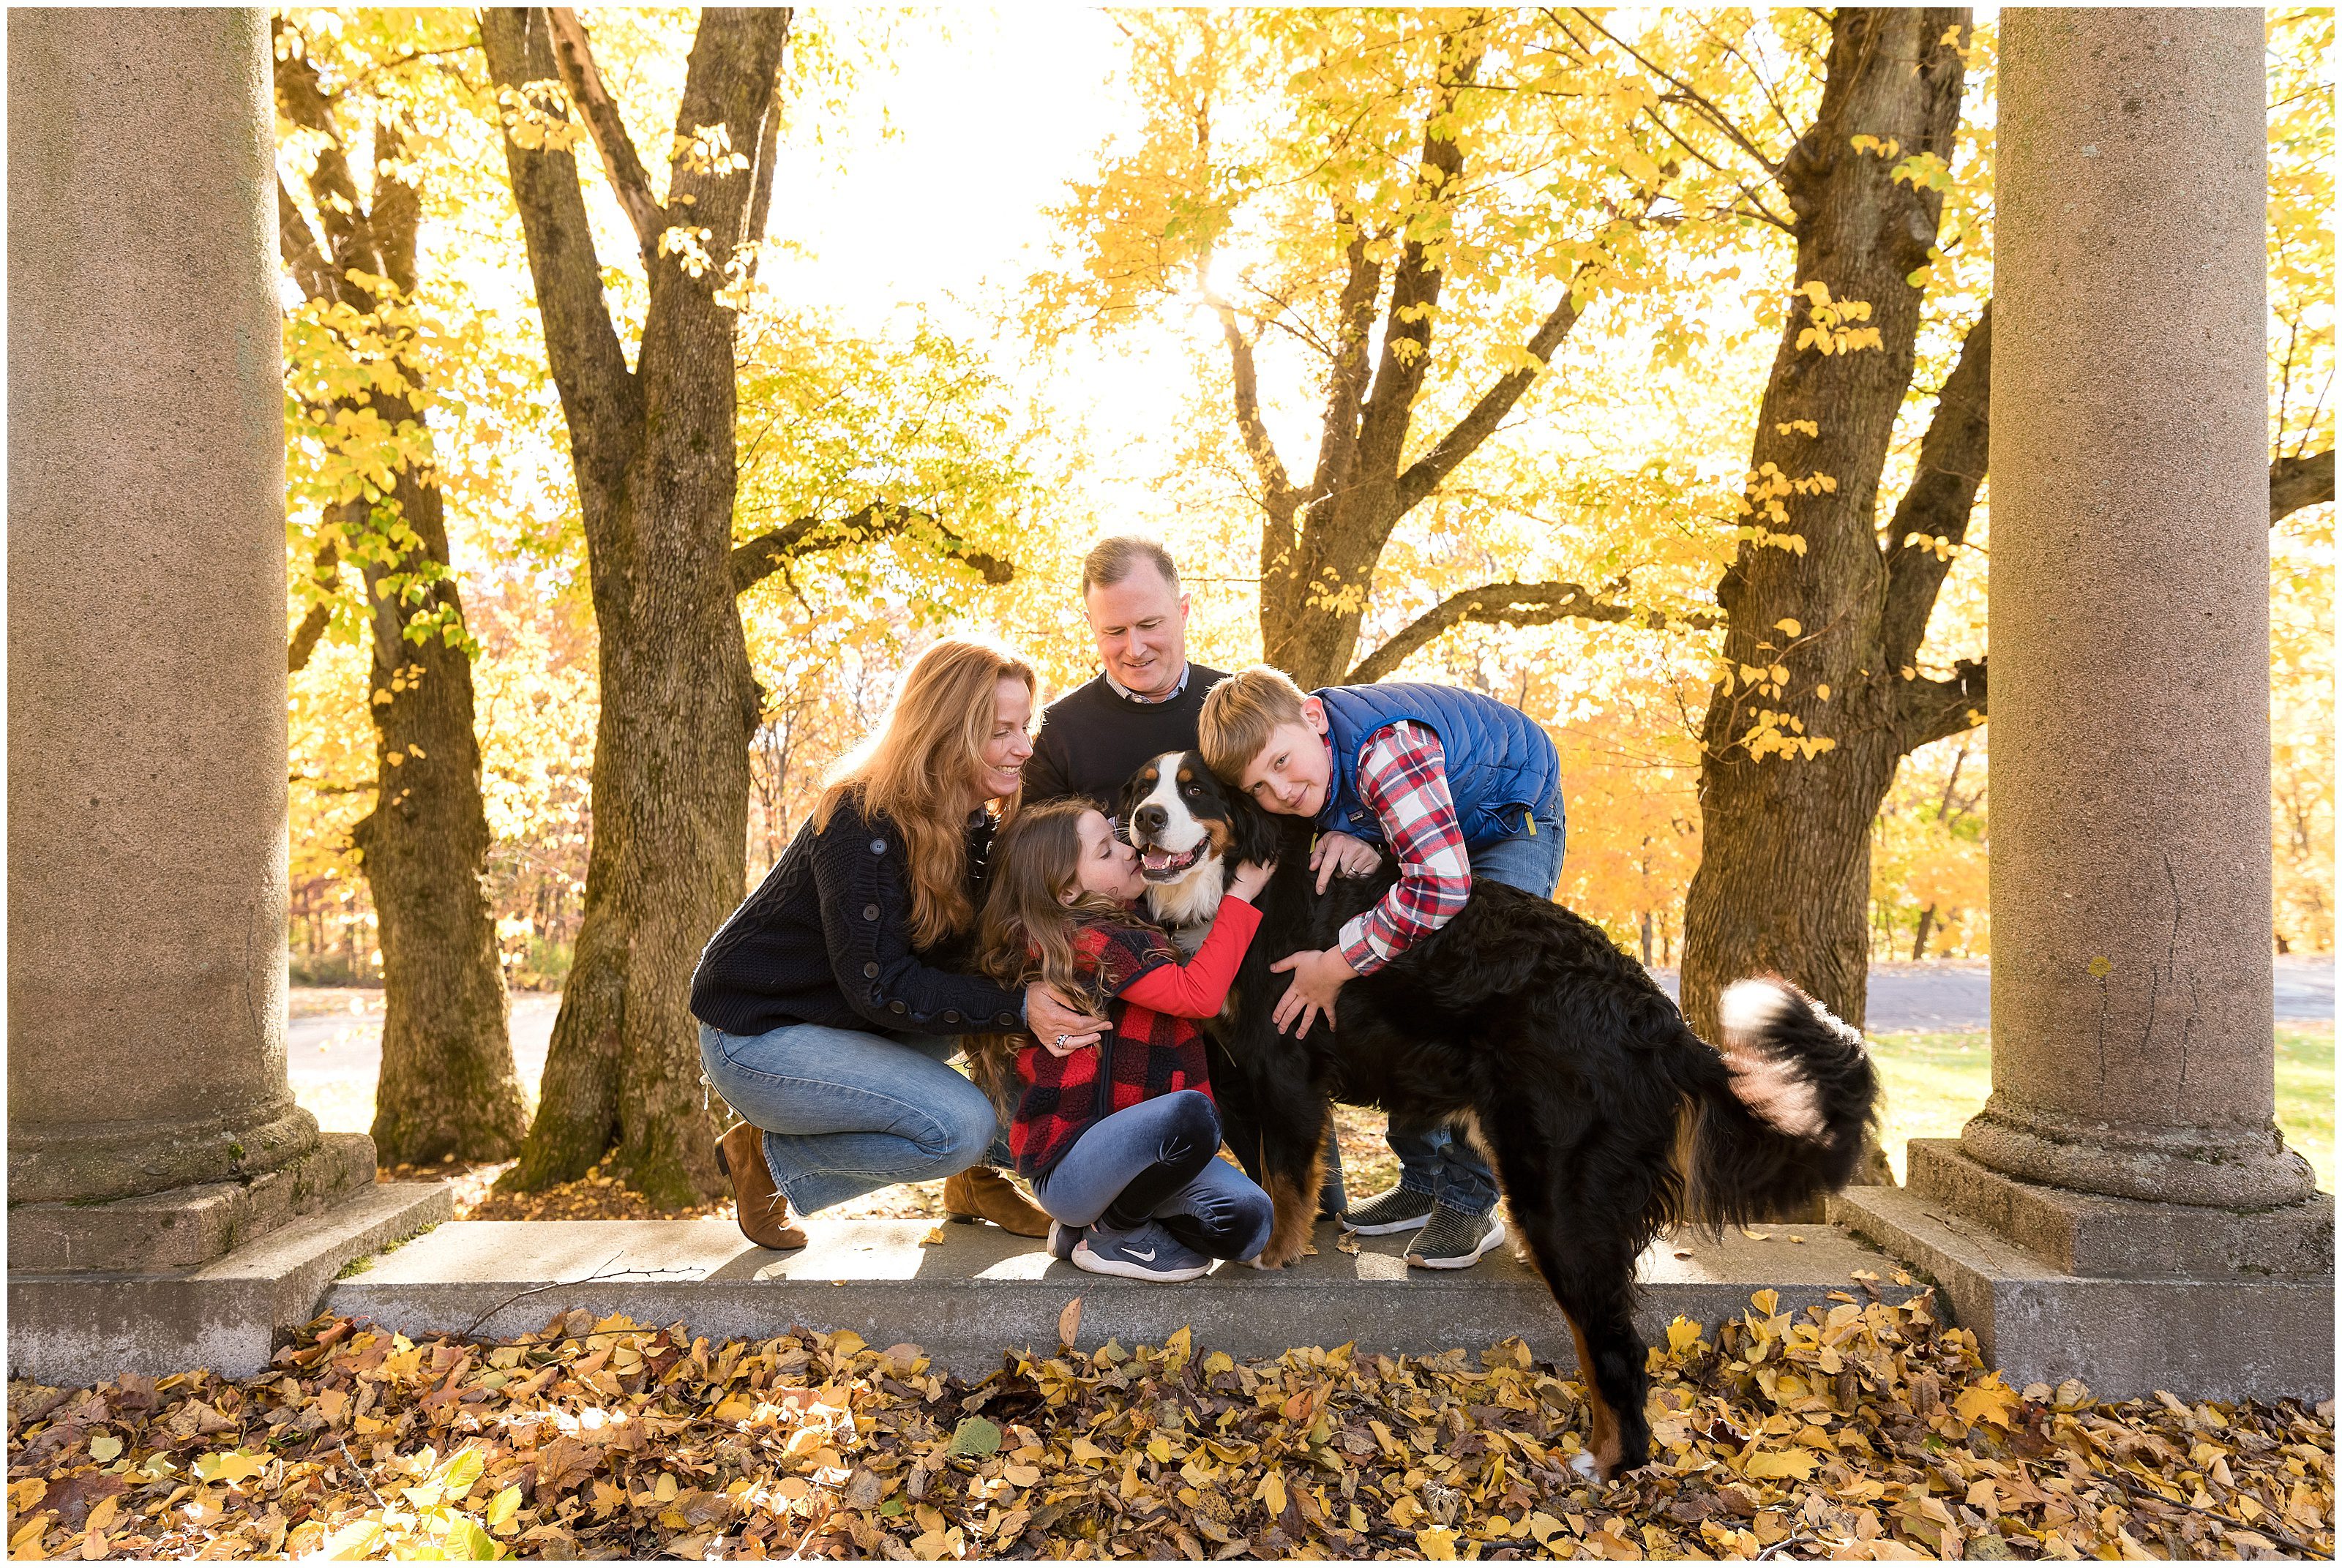 Puppy and family at Larz Anderson Park in Brookline